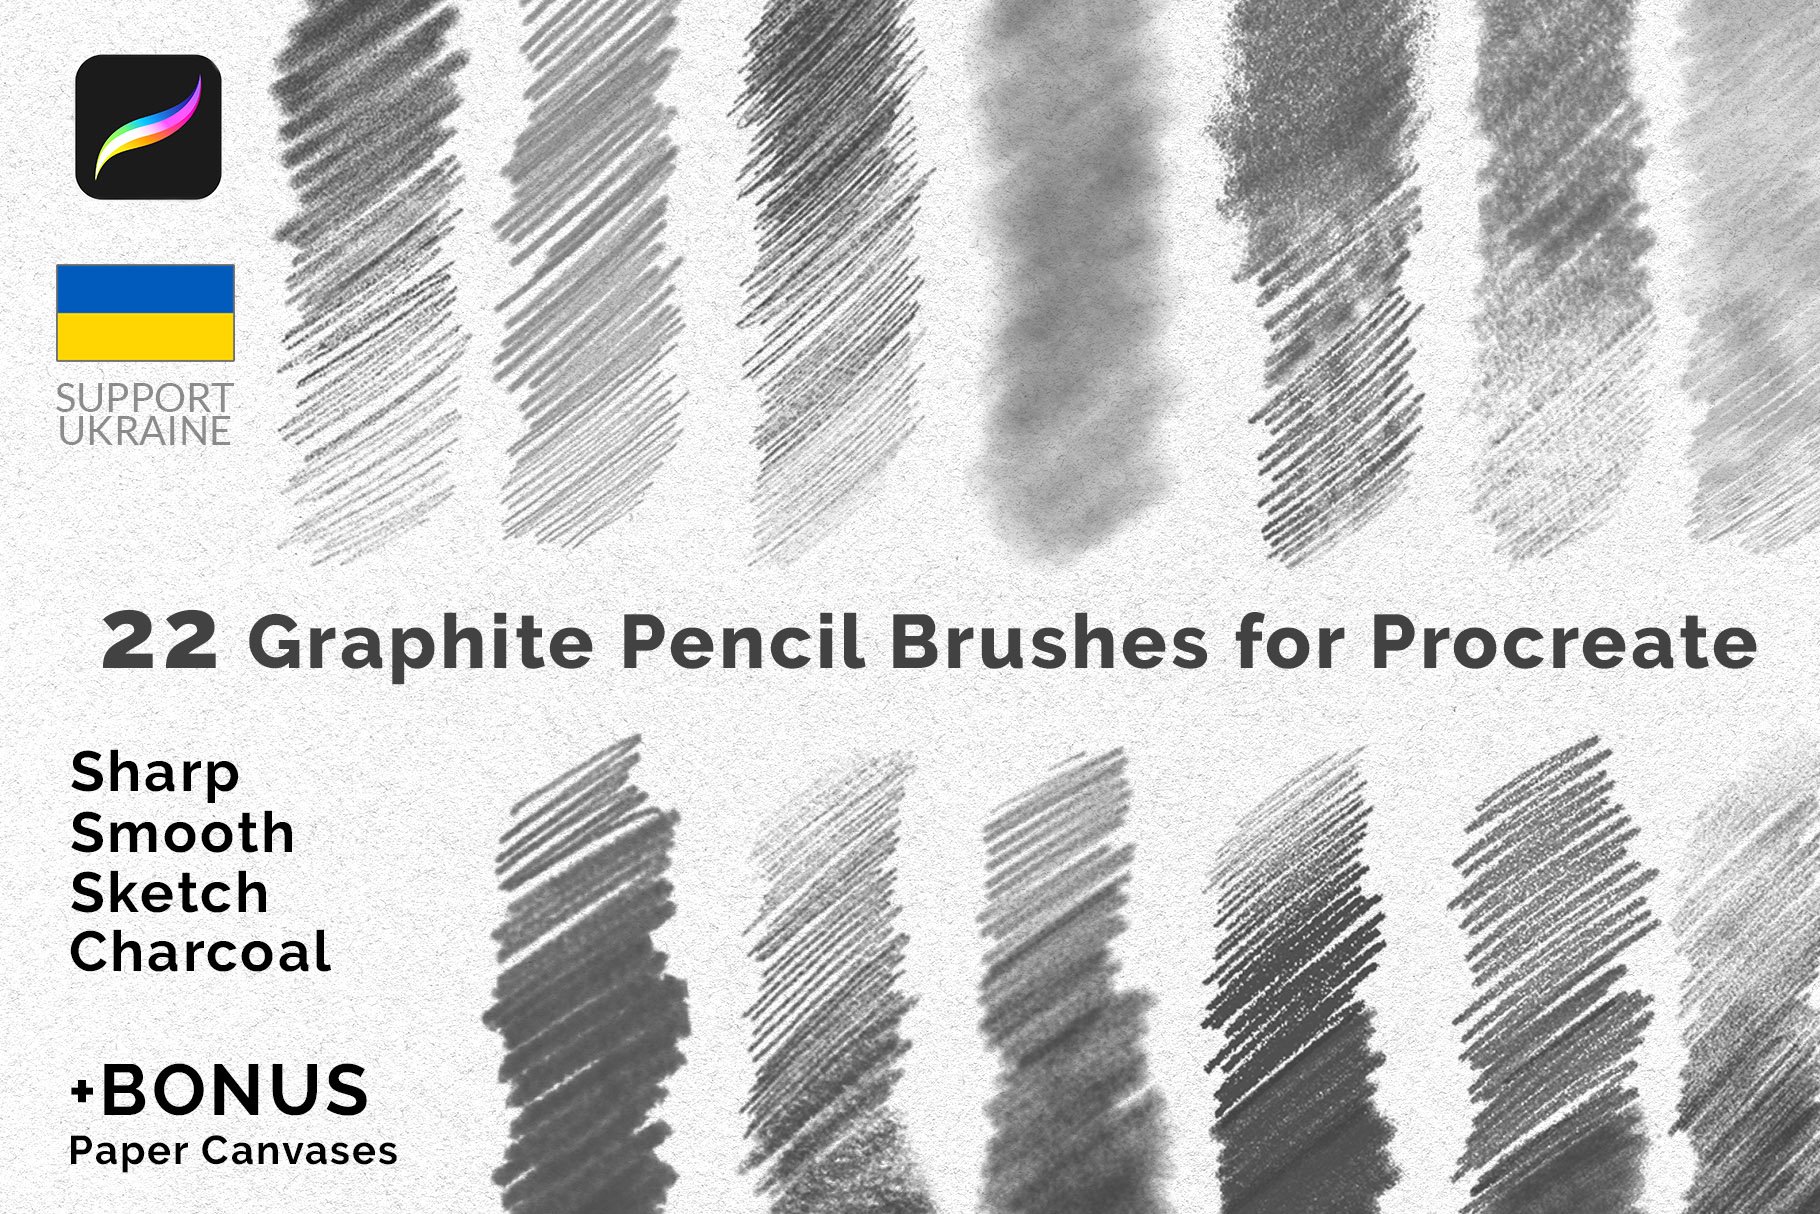 Pencil Brushes Procreate Pack of 22 cover image.